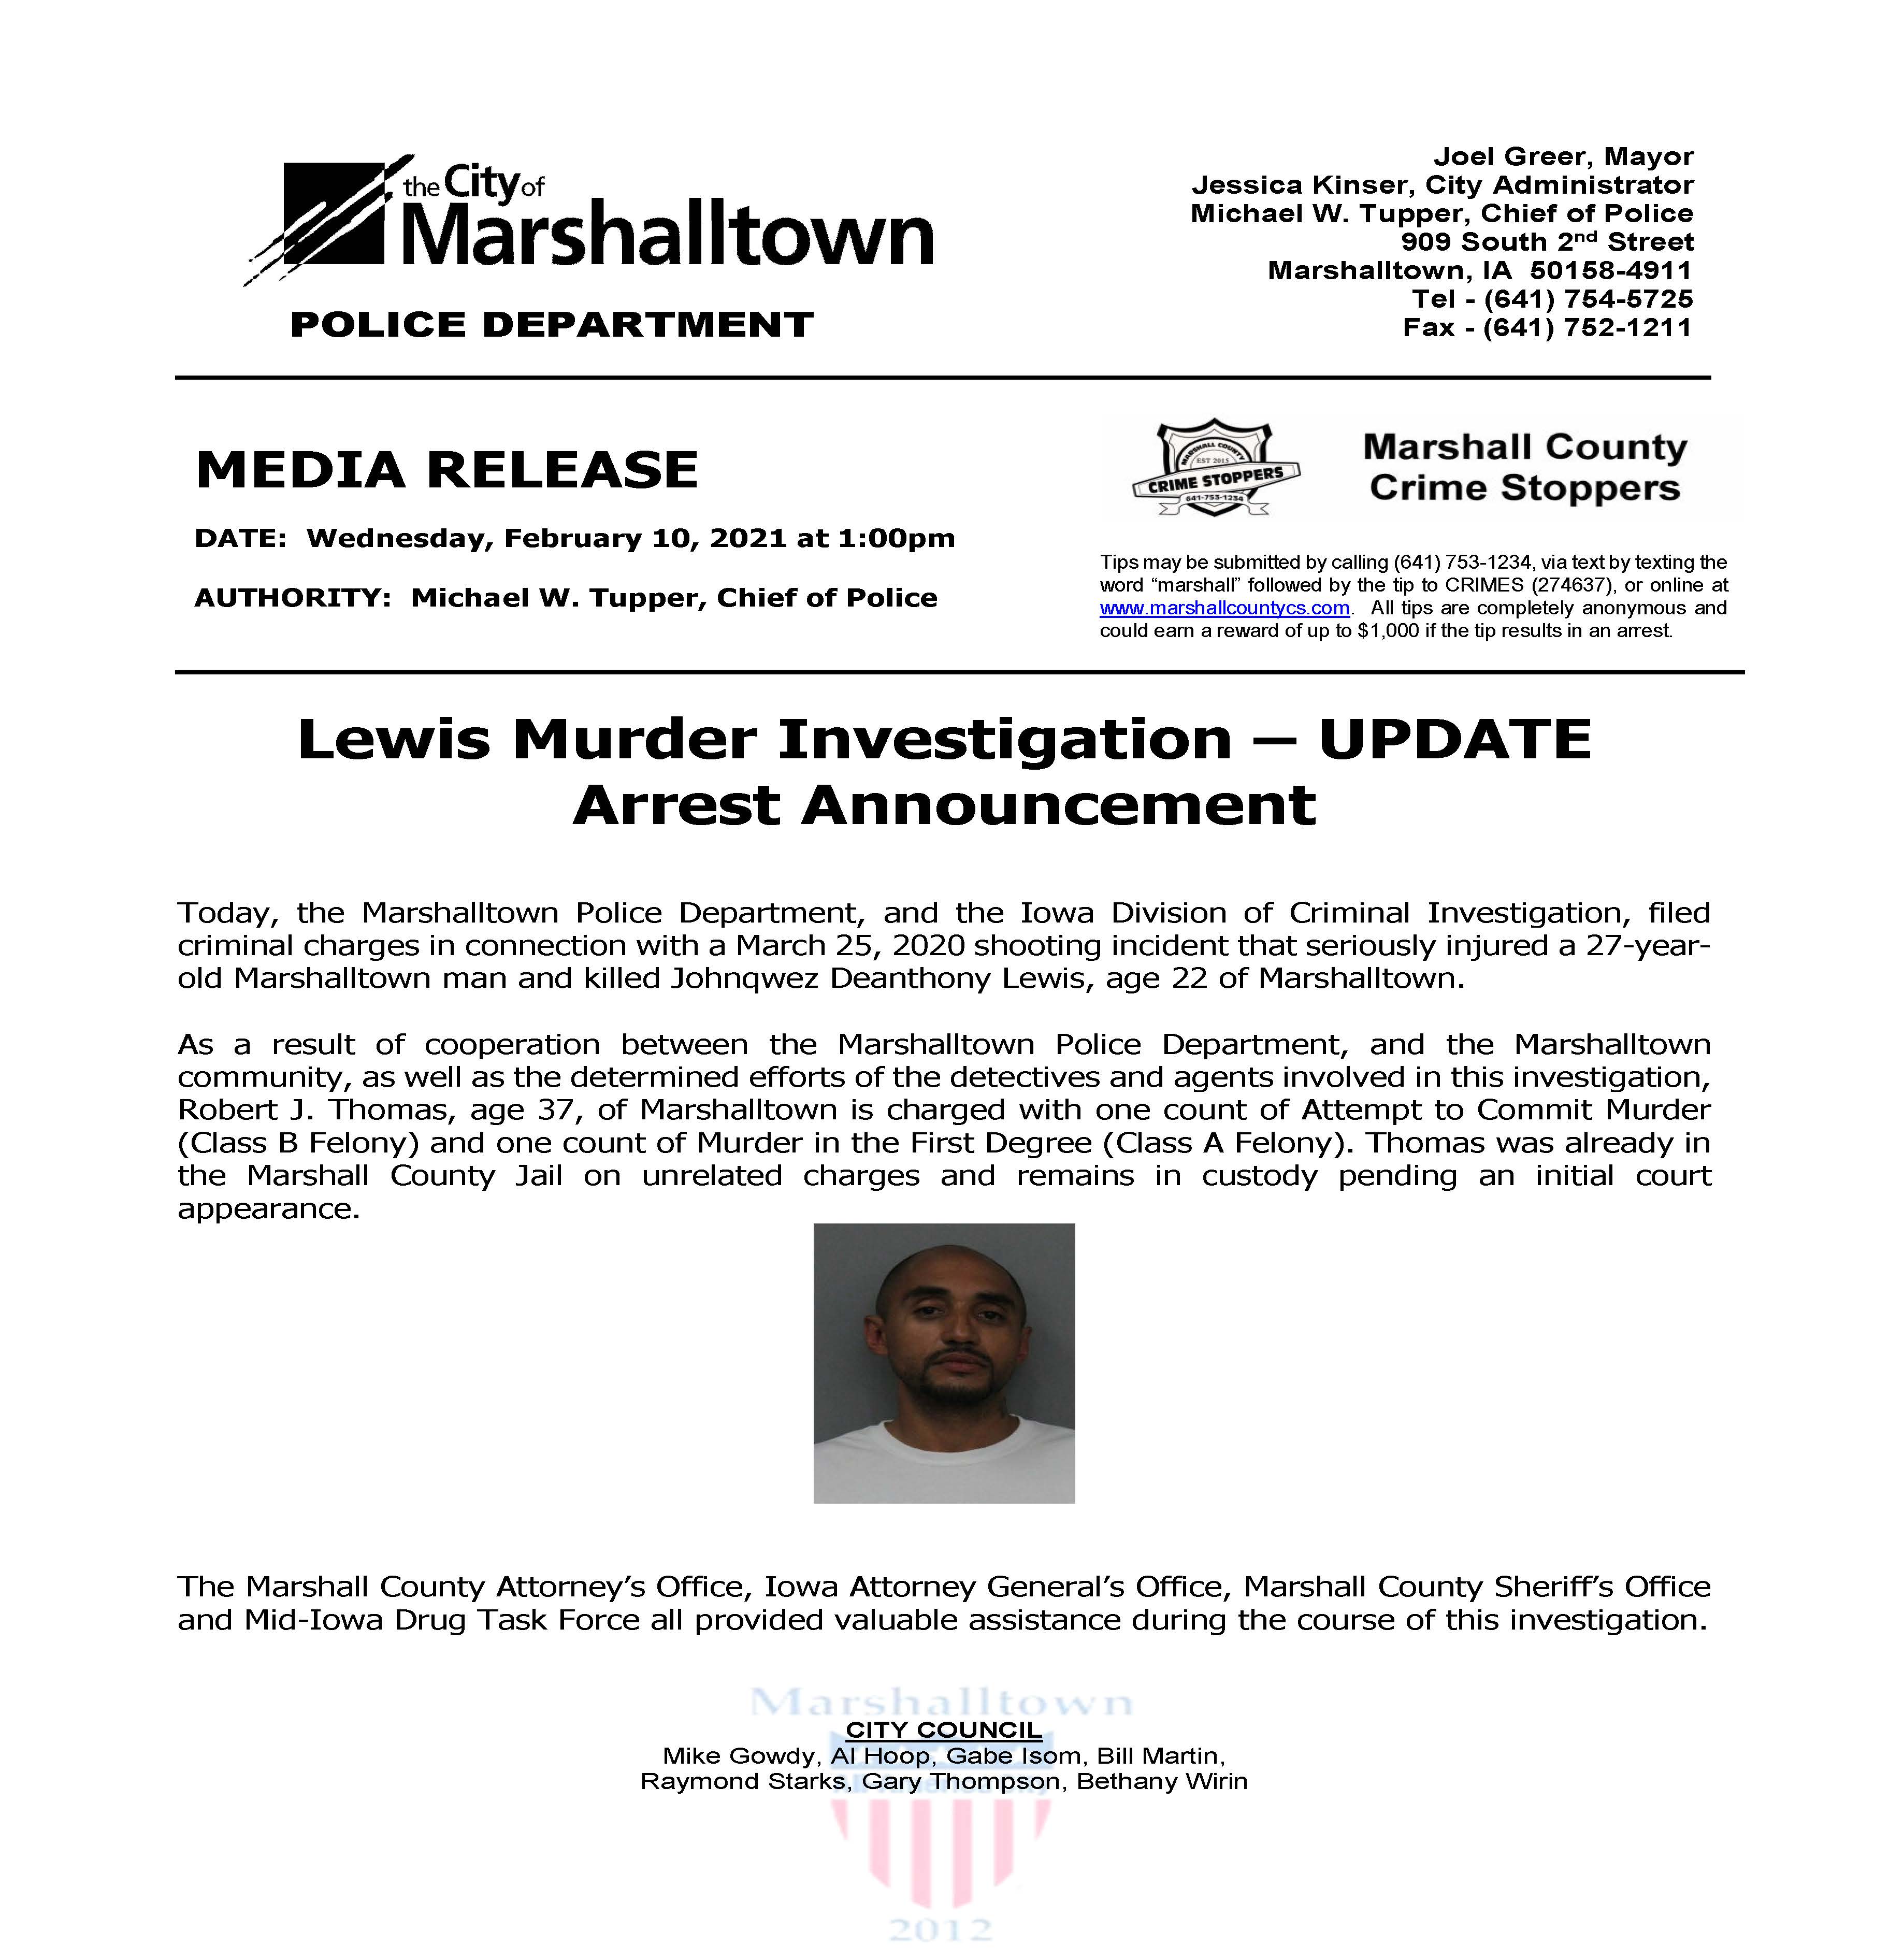 Link to Marshalltown PD press releasae